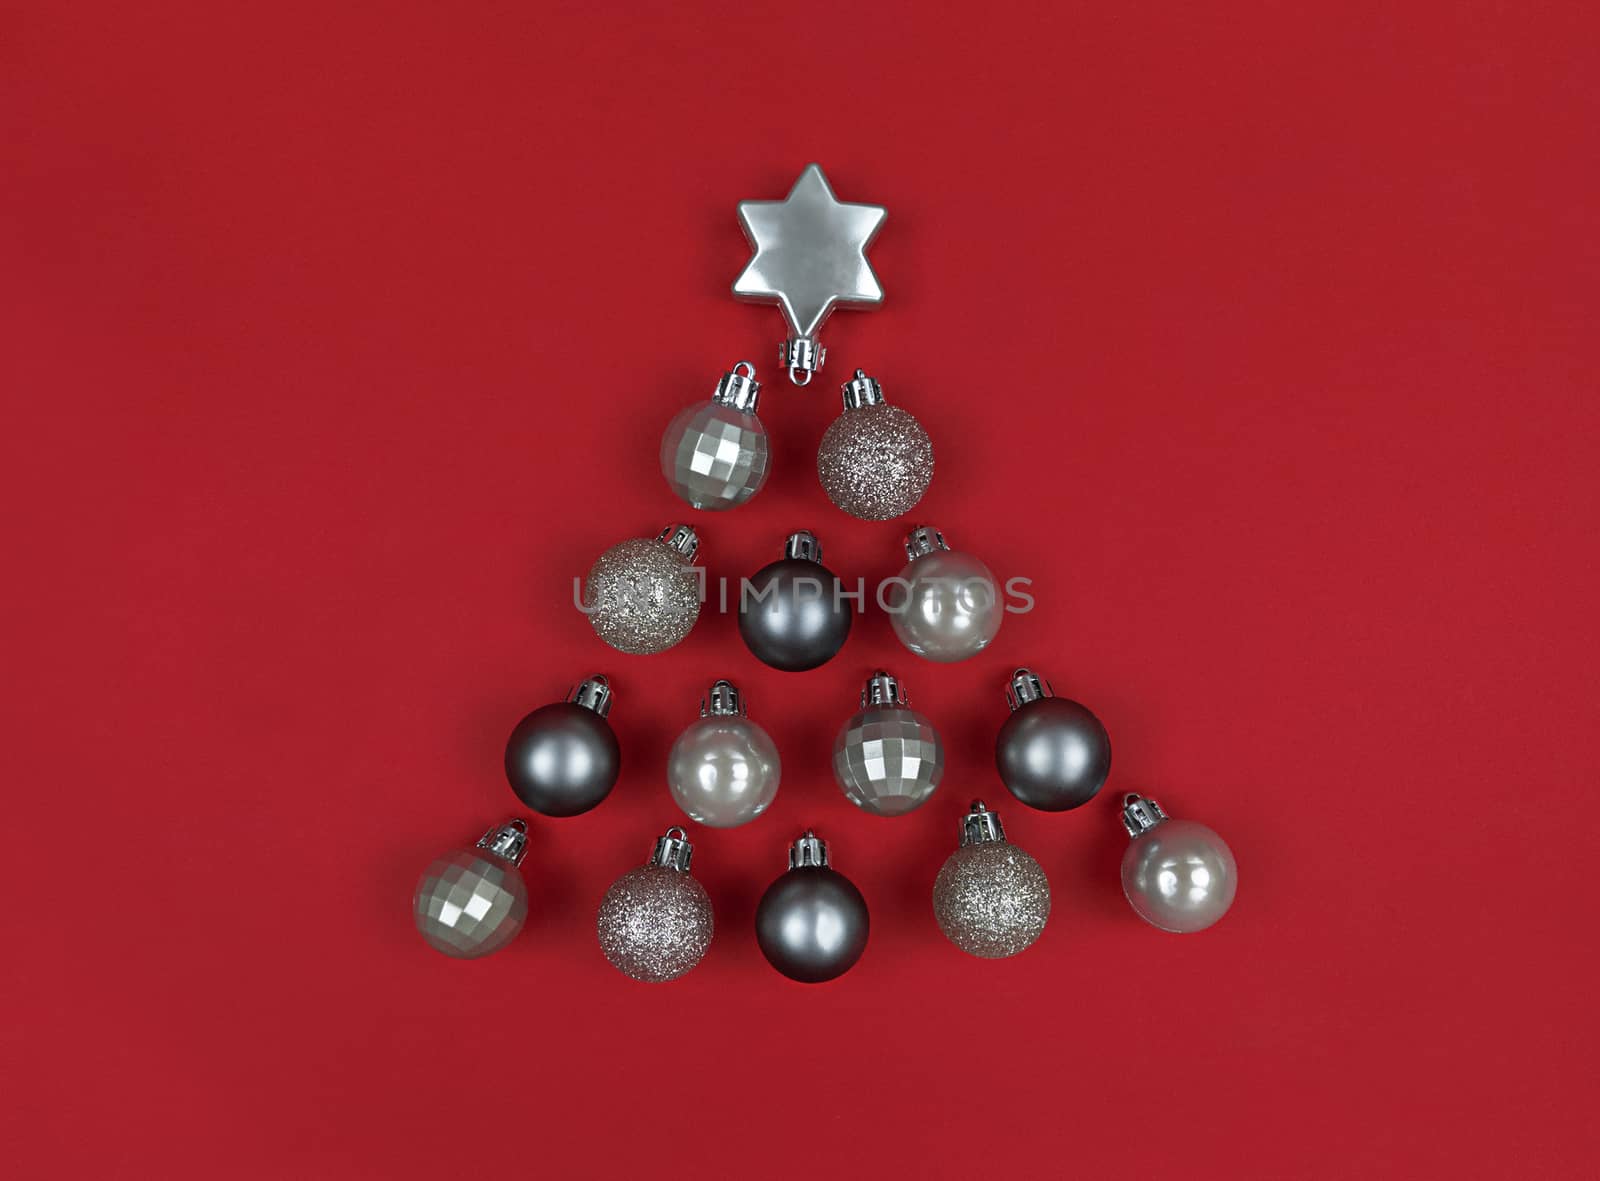 Christmas tree shape made with decor baubles on red paper.